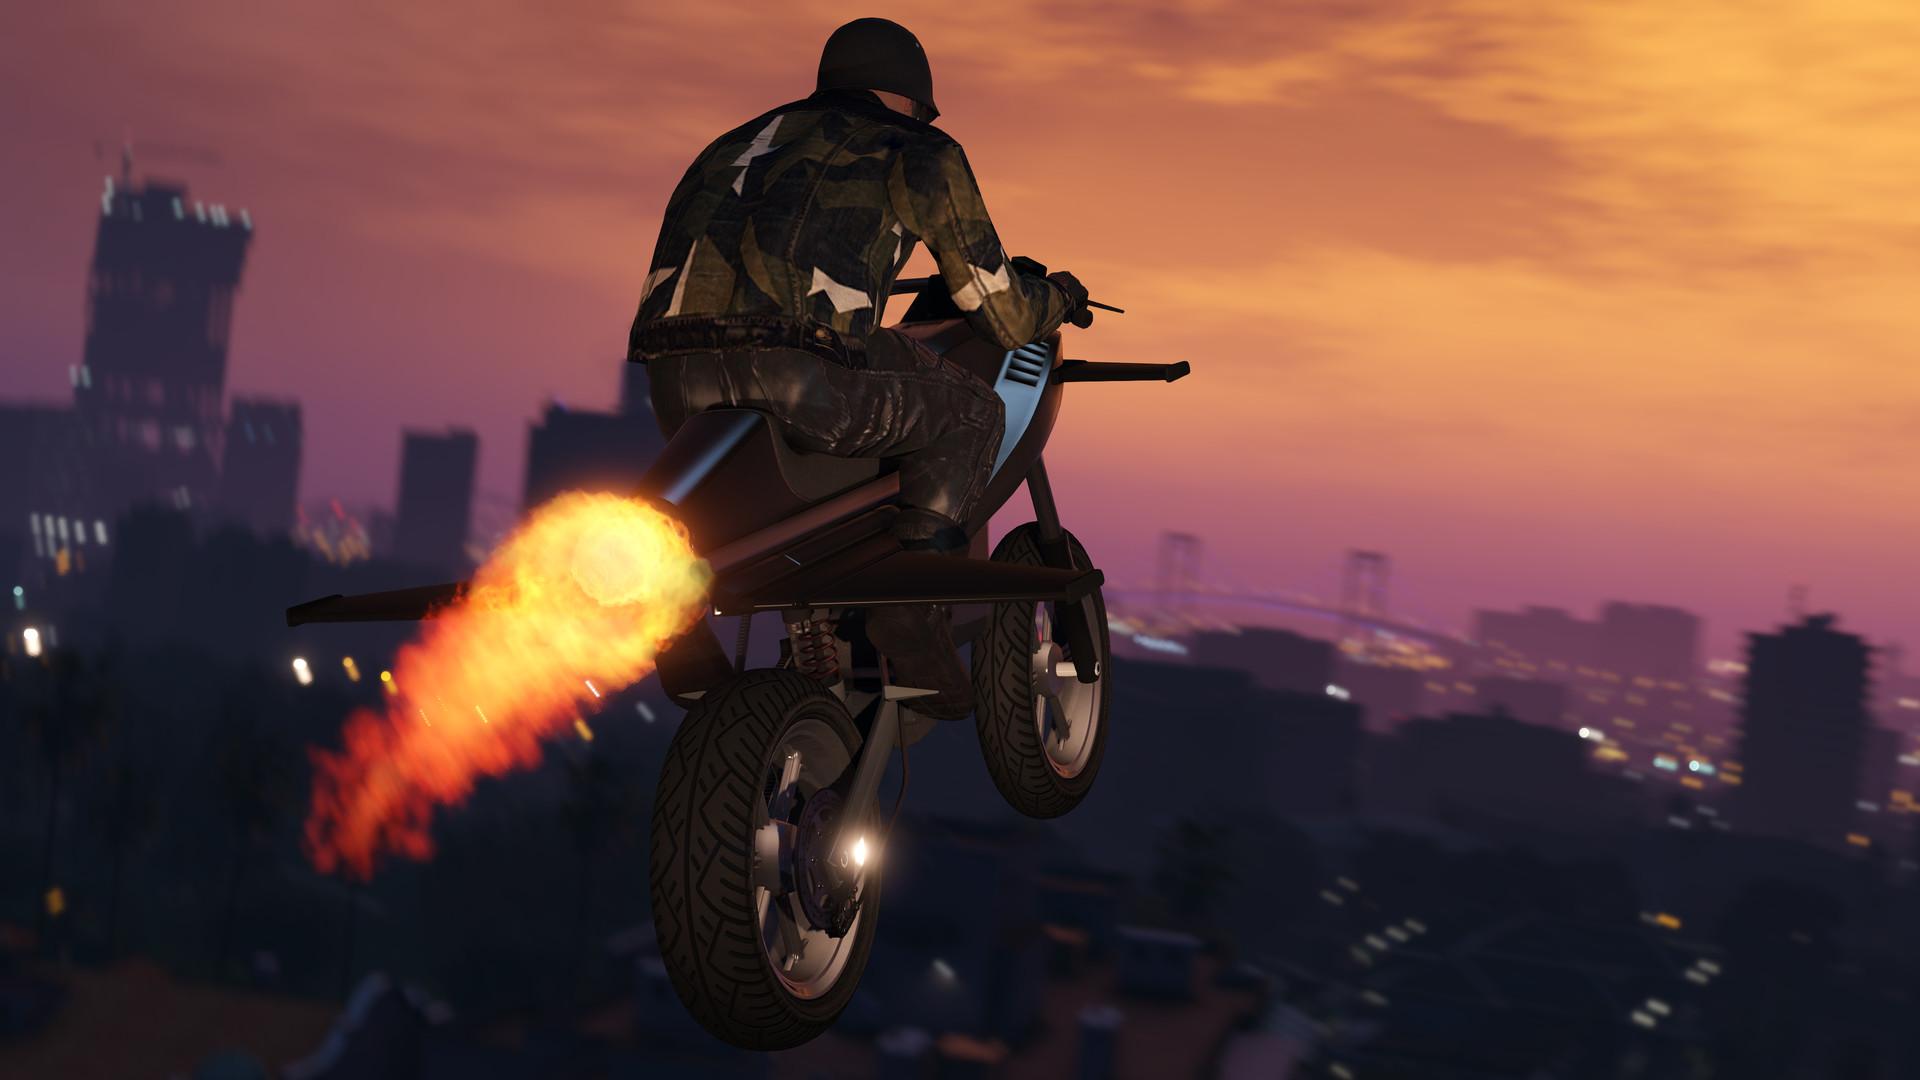 Screenshot №34 from game Grand Theft Auto V